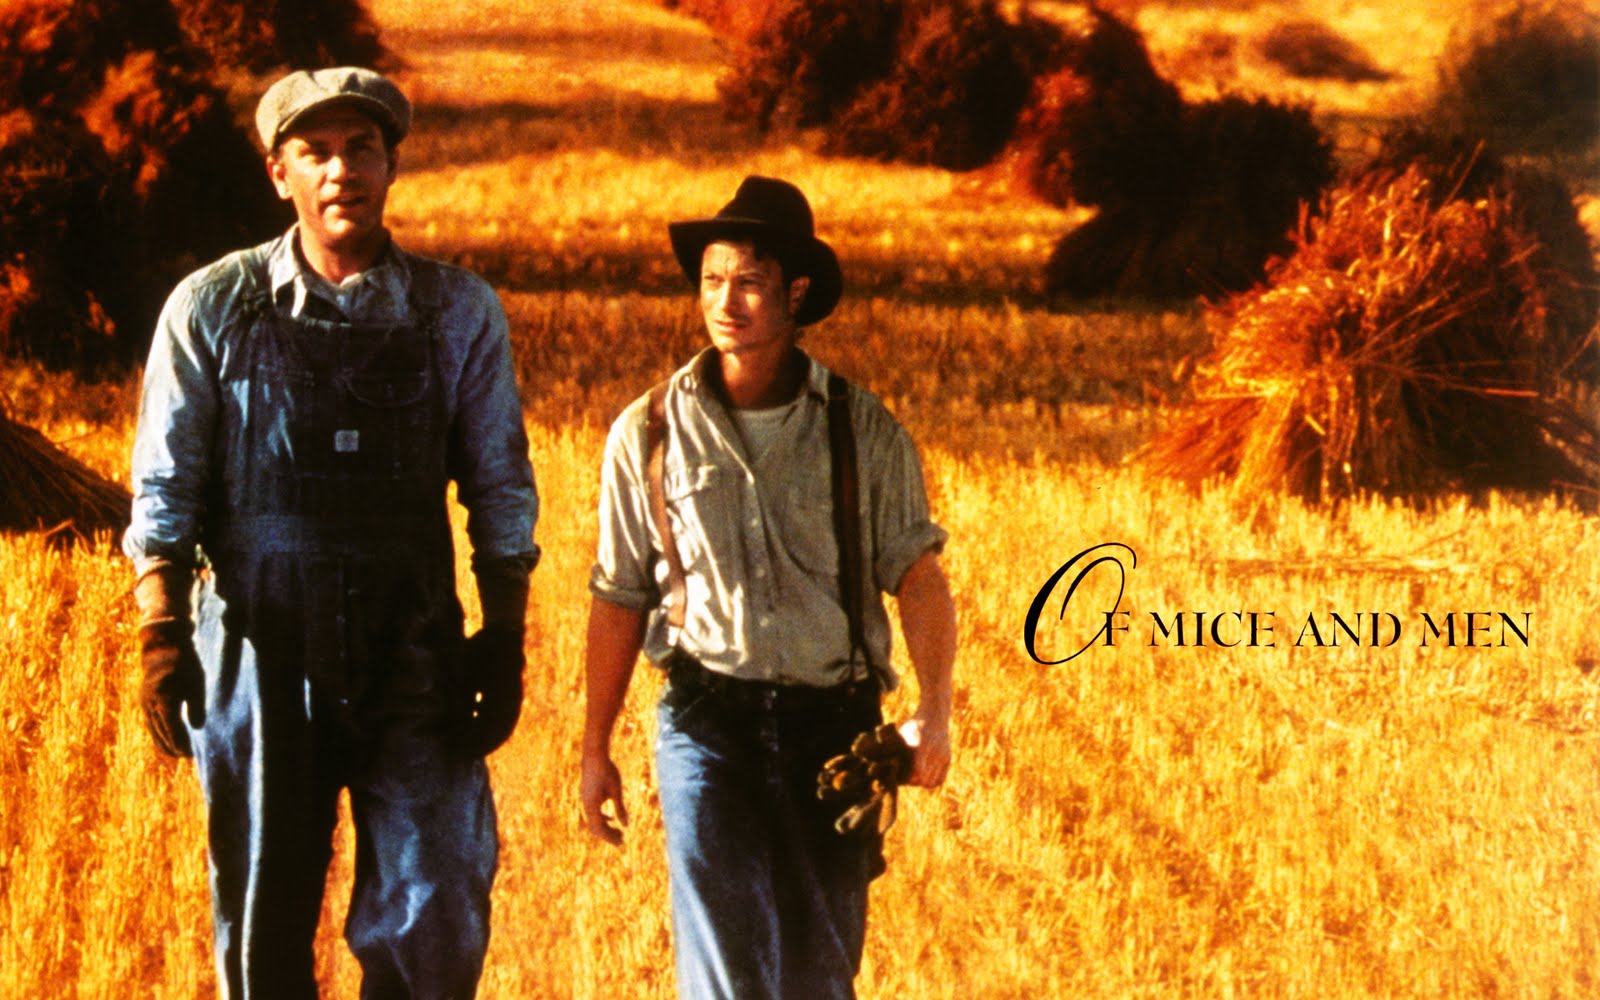 Of mice and men relationship between george and lennie essay